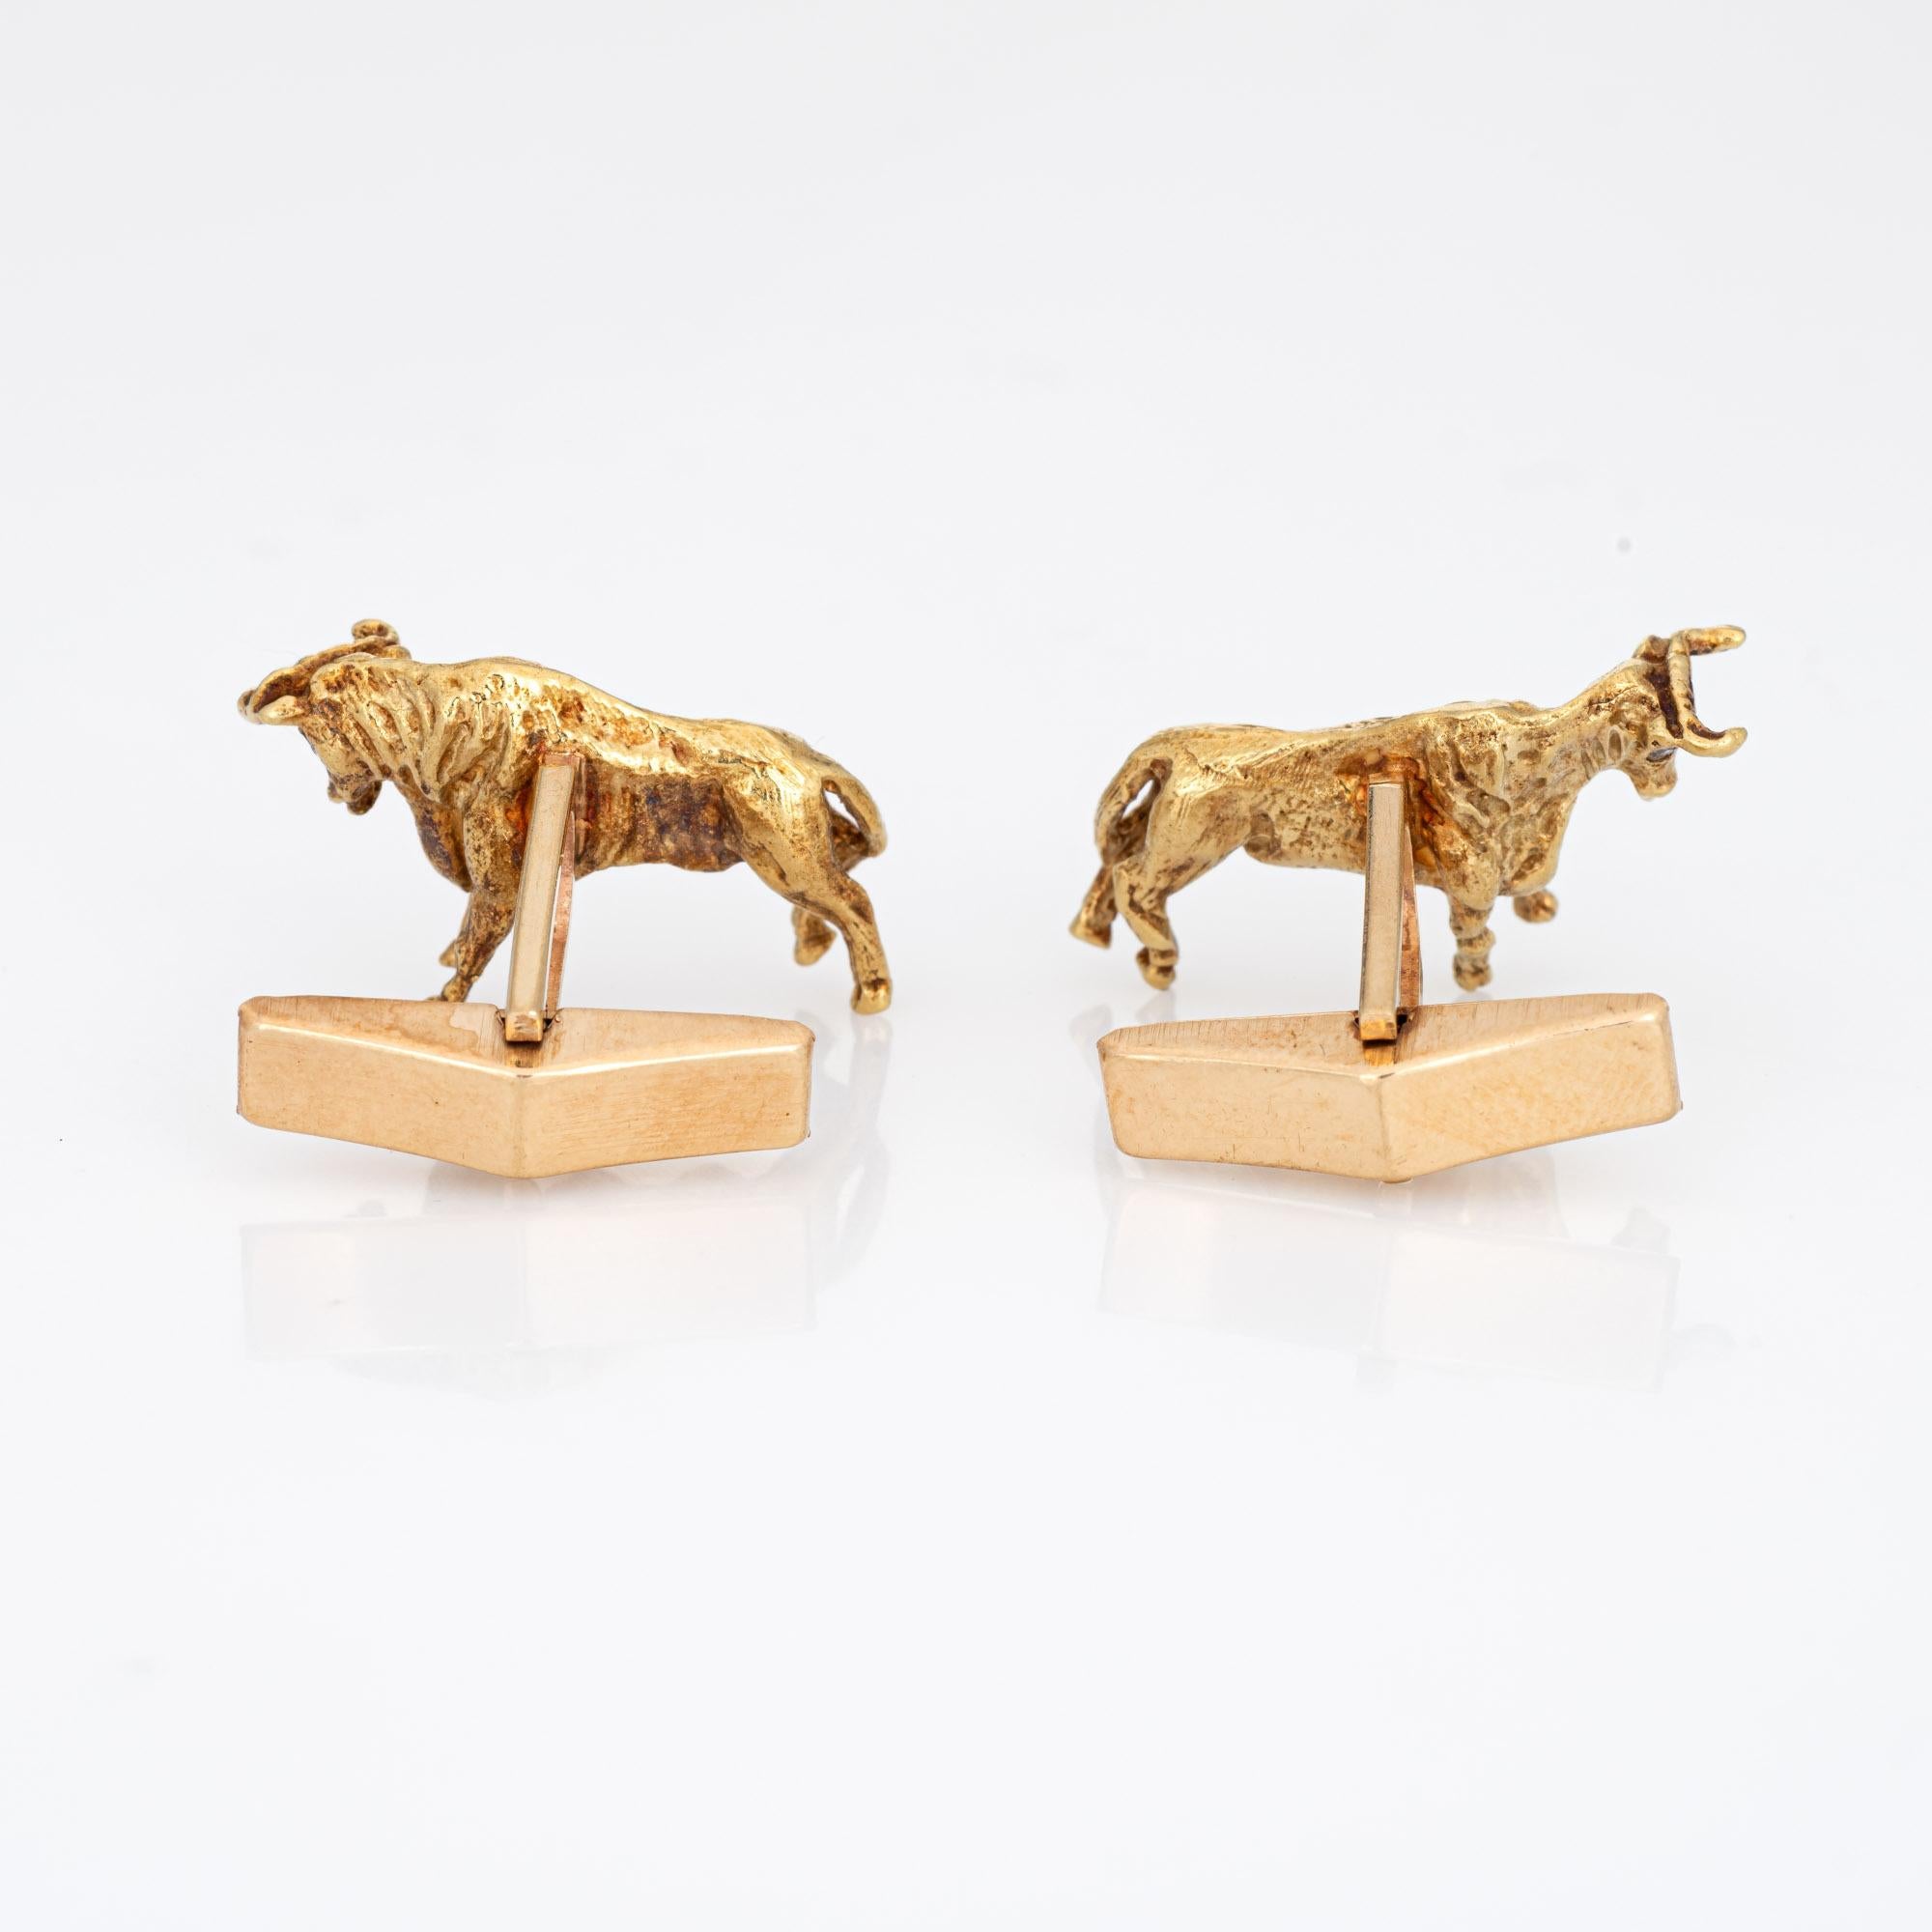 Finely detailed pair of Bull cufflinks crafted in 14k yellow gold (circa 1970s to 1980s). 

The Bulls feature lifelike detail, and the cufflinks have a nice weighty feel (15.1 grams). Ideal for day or evening wear. 

The cufflinks are in very good